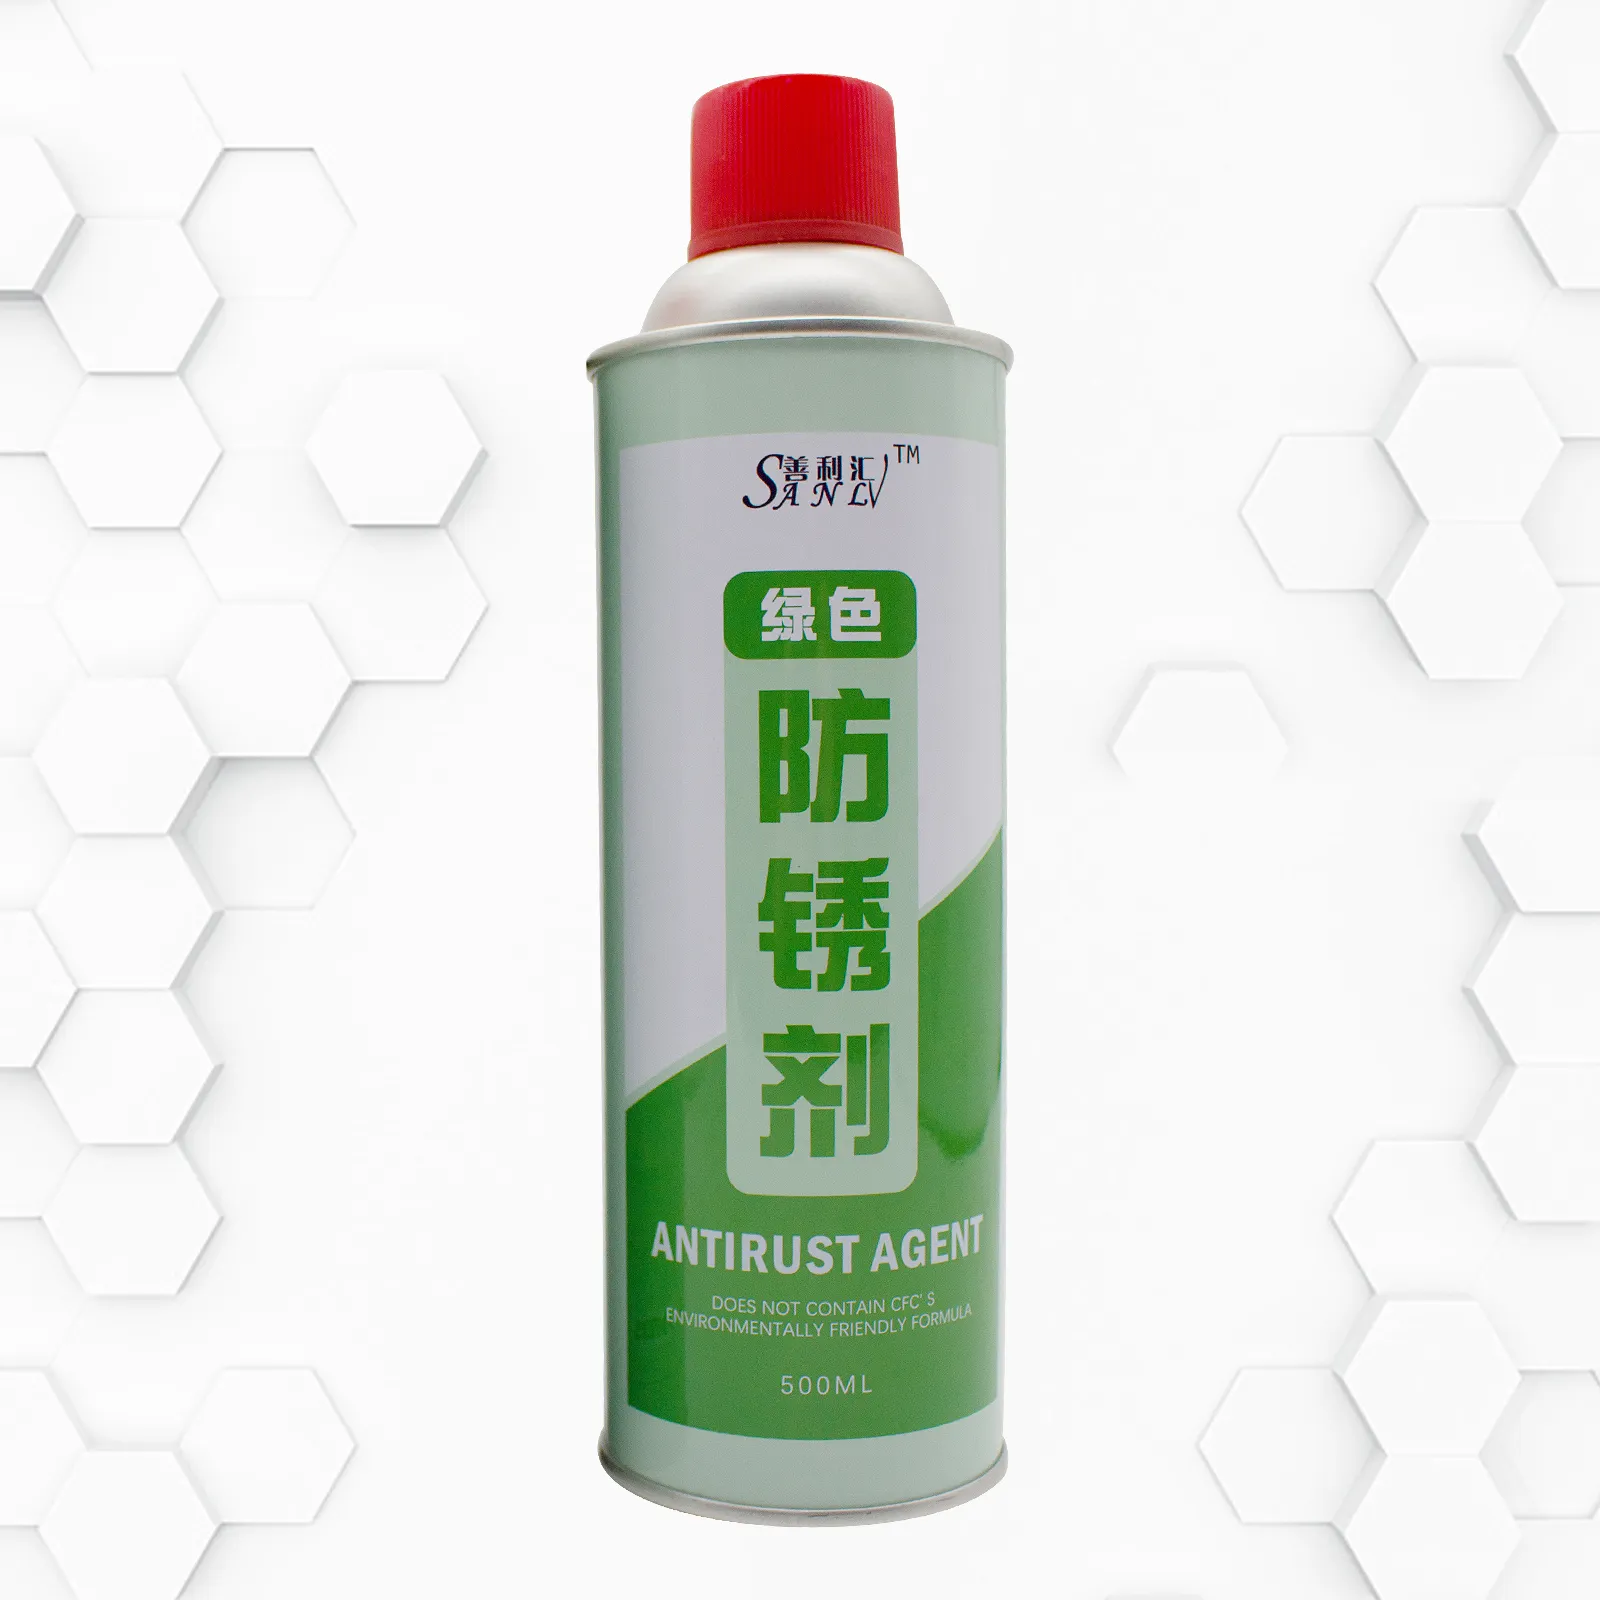 Anti-rust spray is suitable for metal anti-rust function, anti-corrosion green anti-rust agent